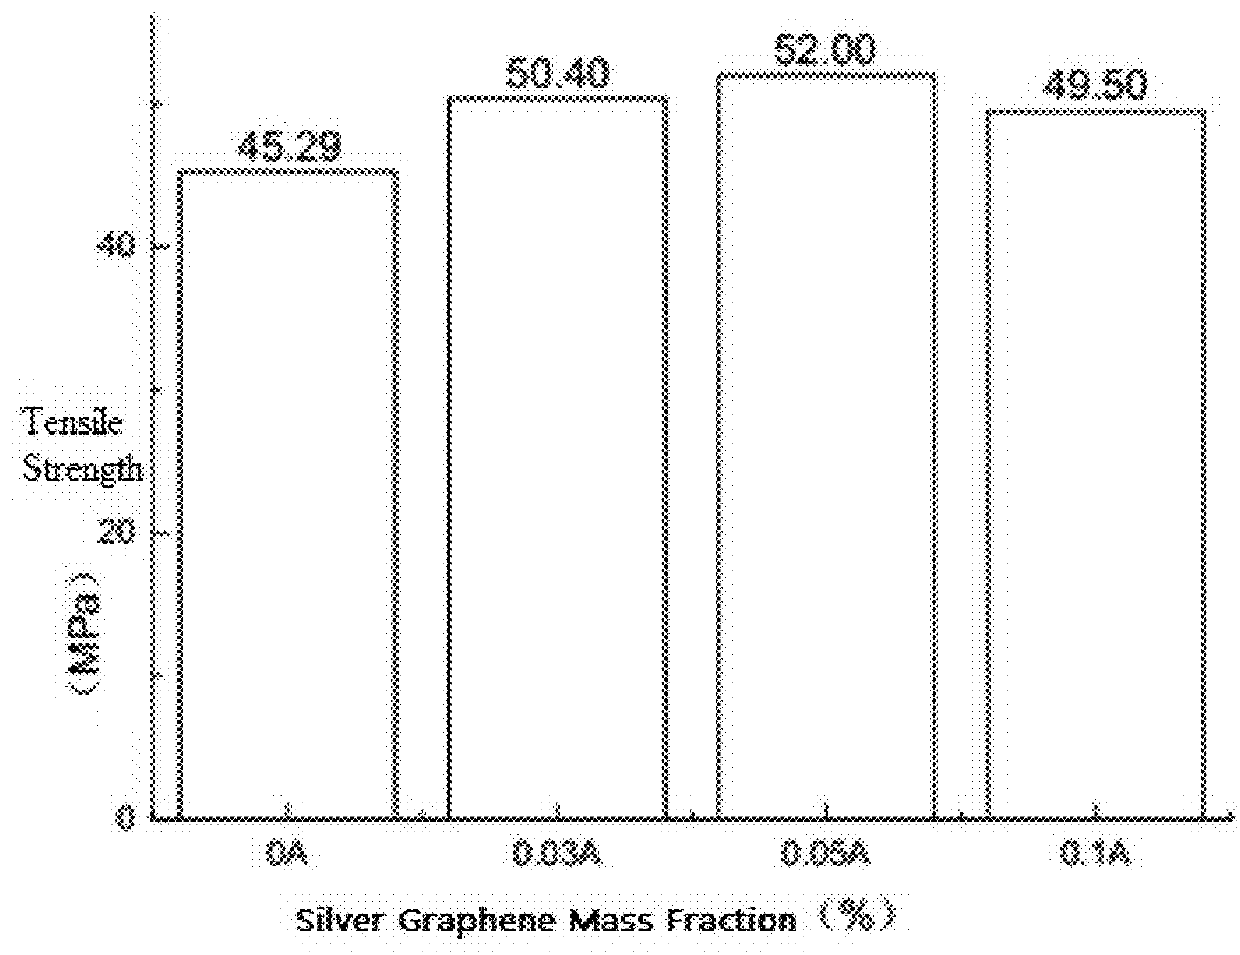 Preparation of Sn-based silver-graphene lead-free composite solders